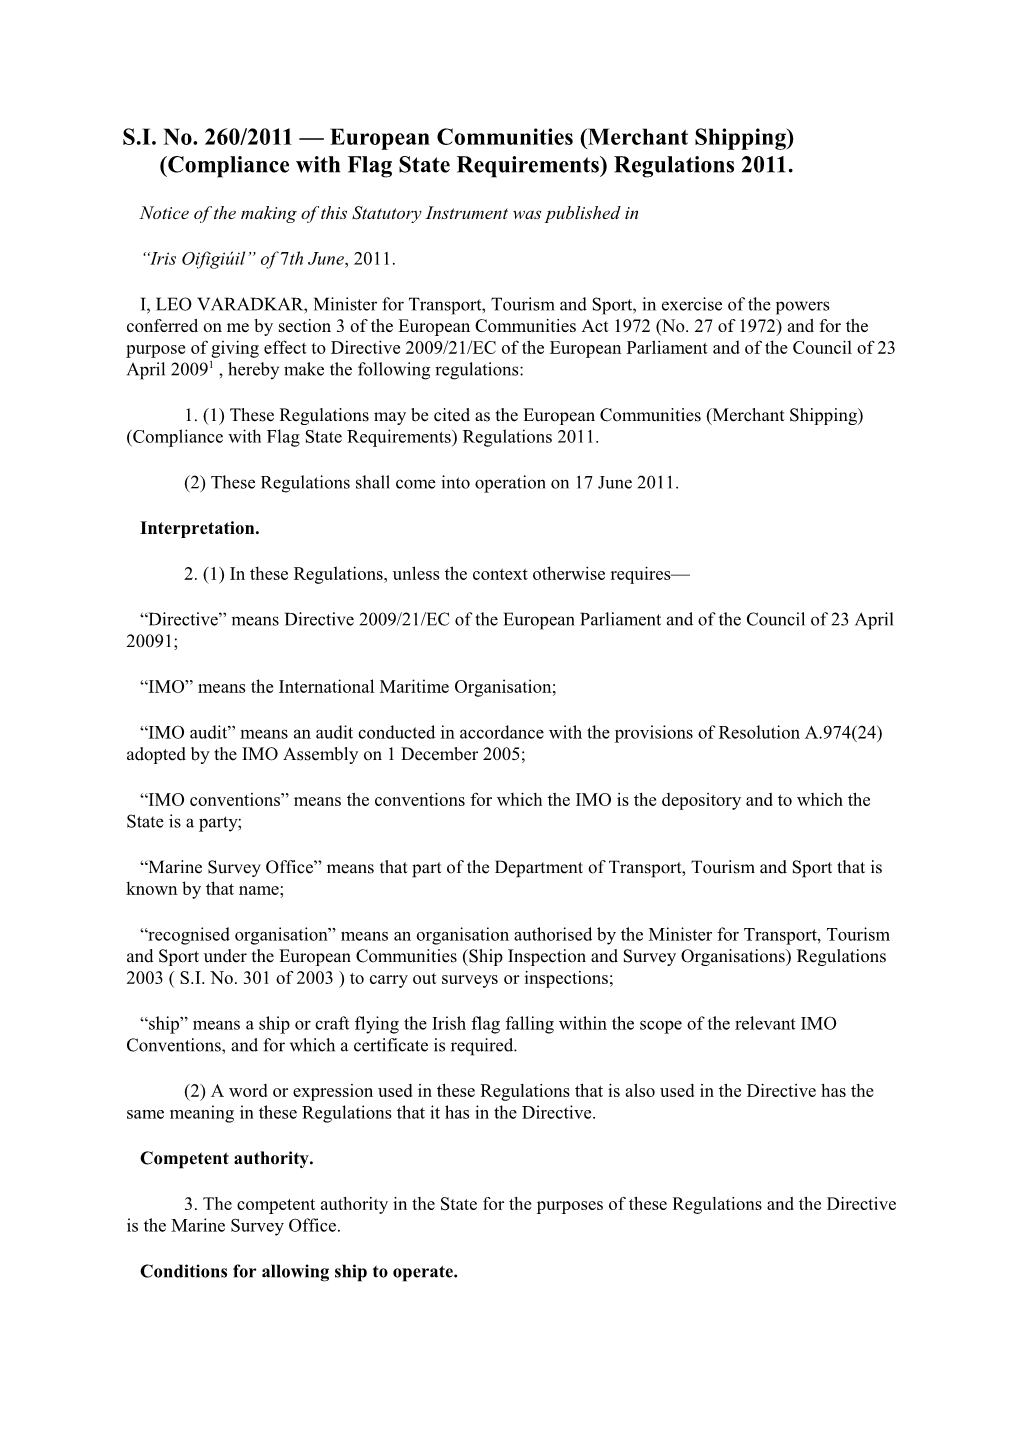 S.I. No. 260/2011 European Communities (Merchant Shipping) (Compliance with Flagstate